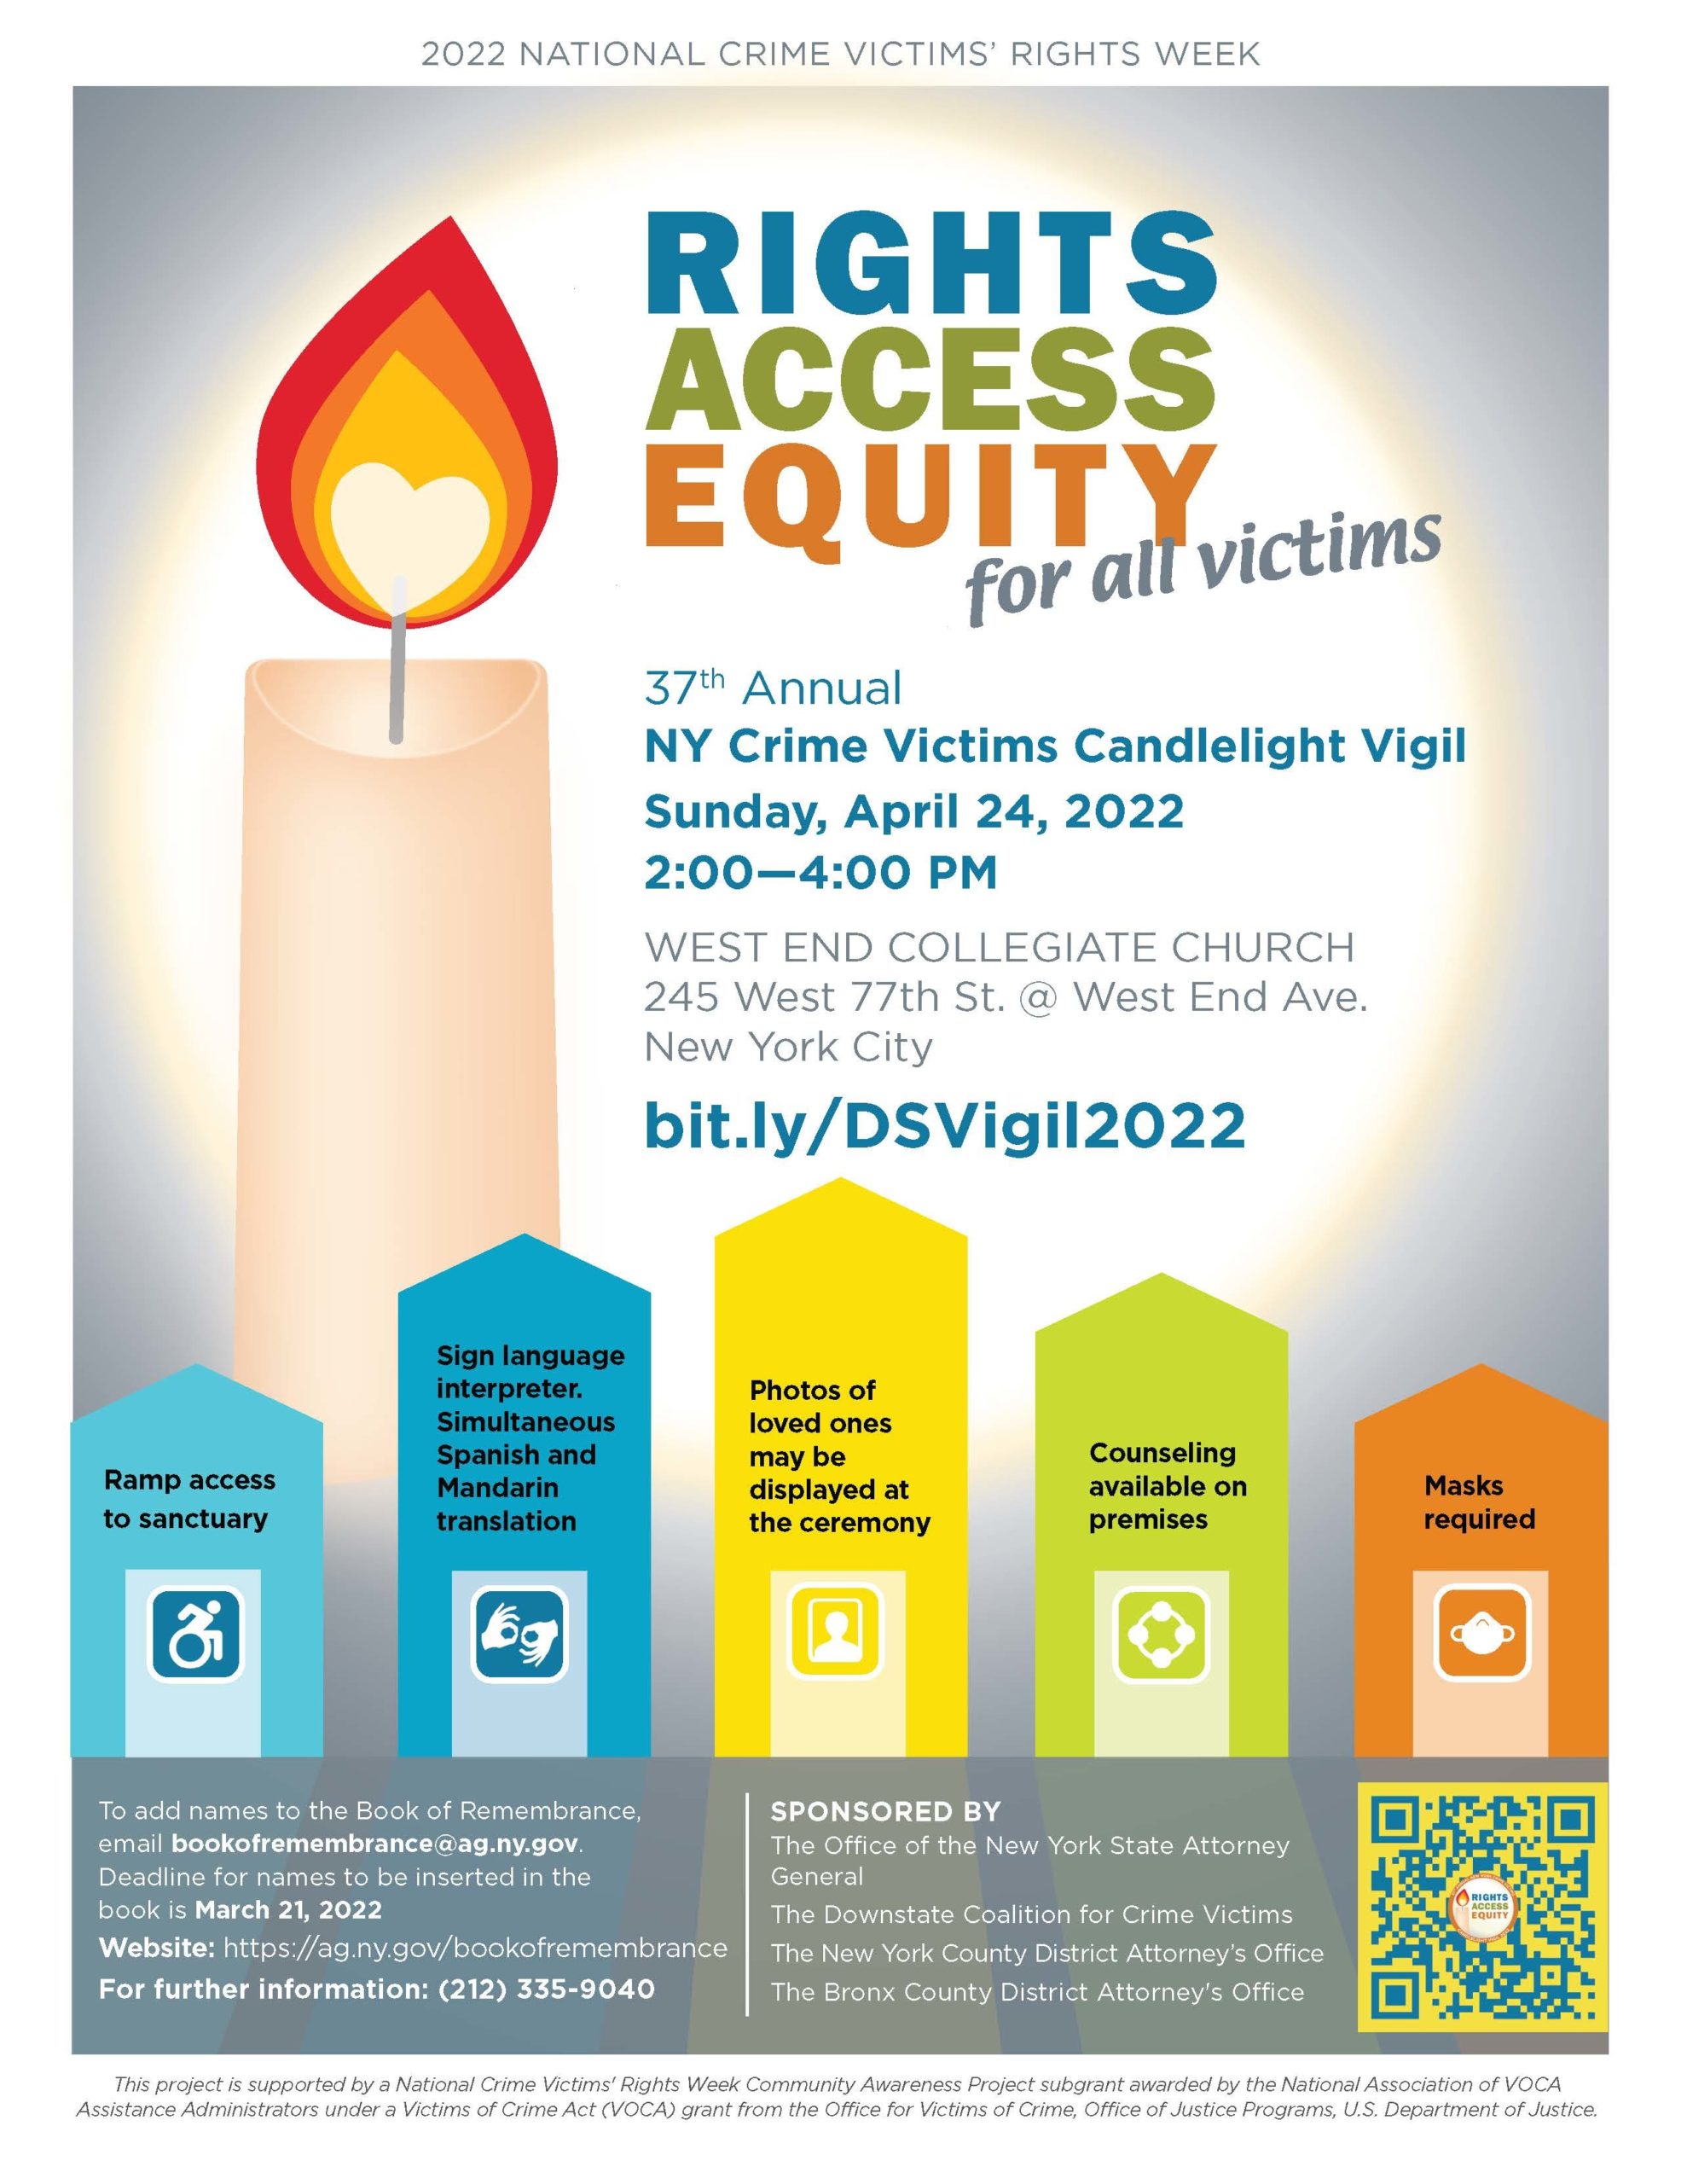 The 37th Annual New York Crime Victims Candlelight Vigil 2022